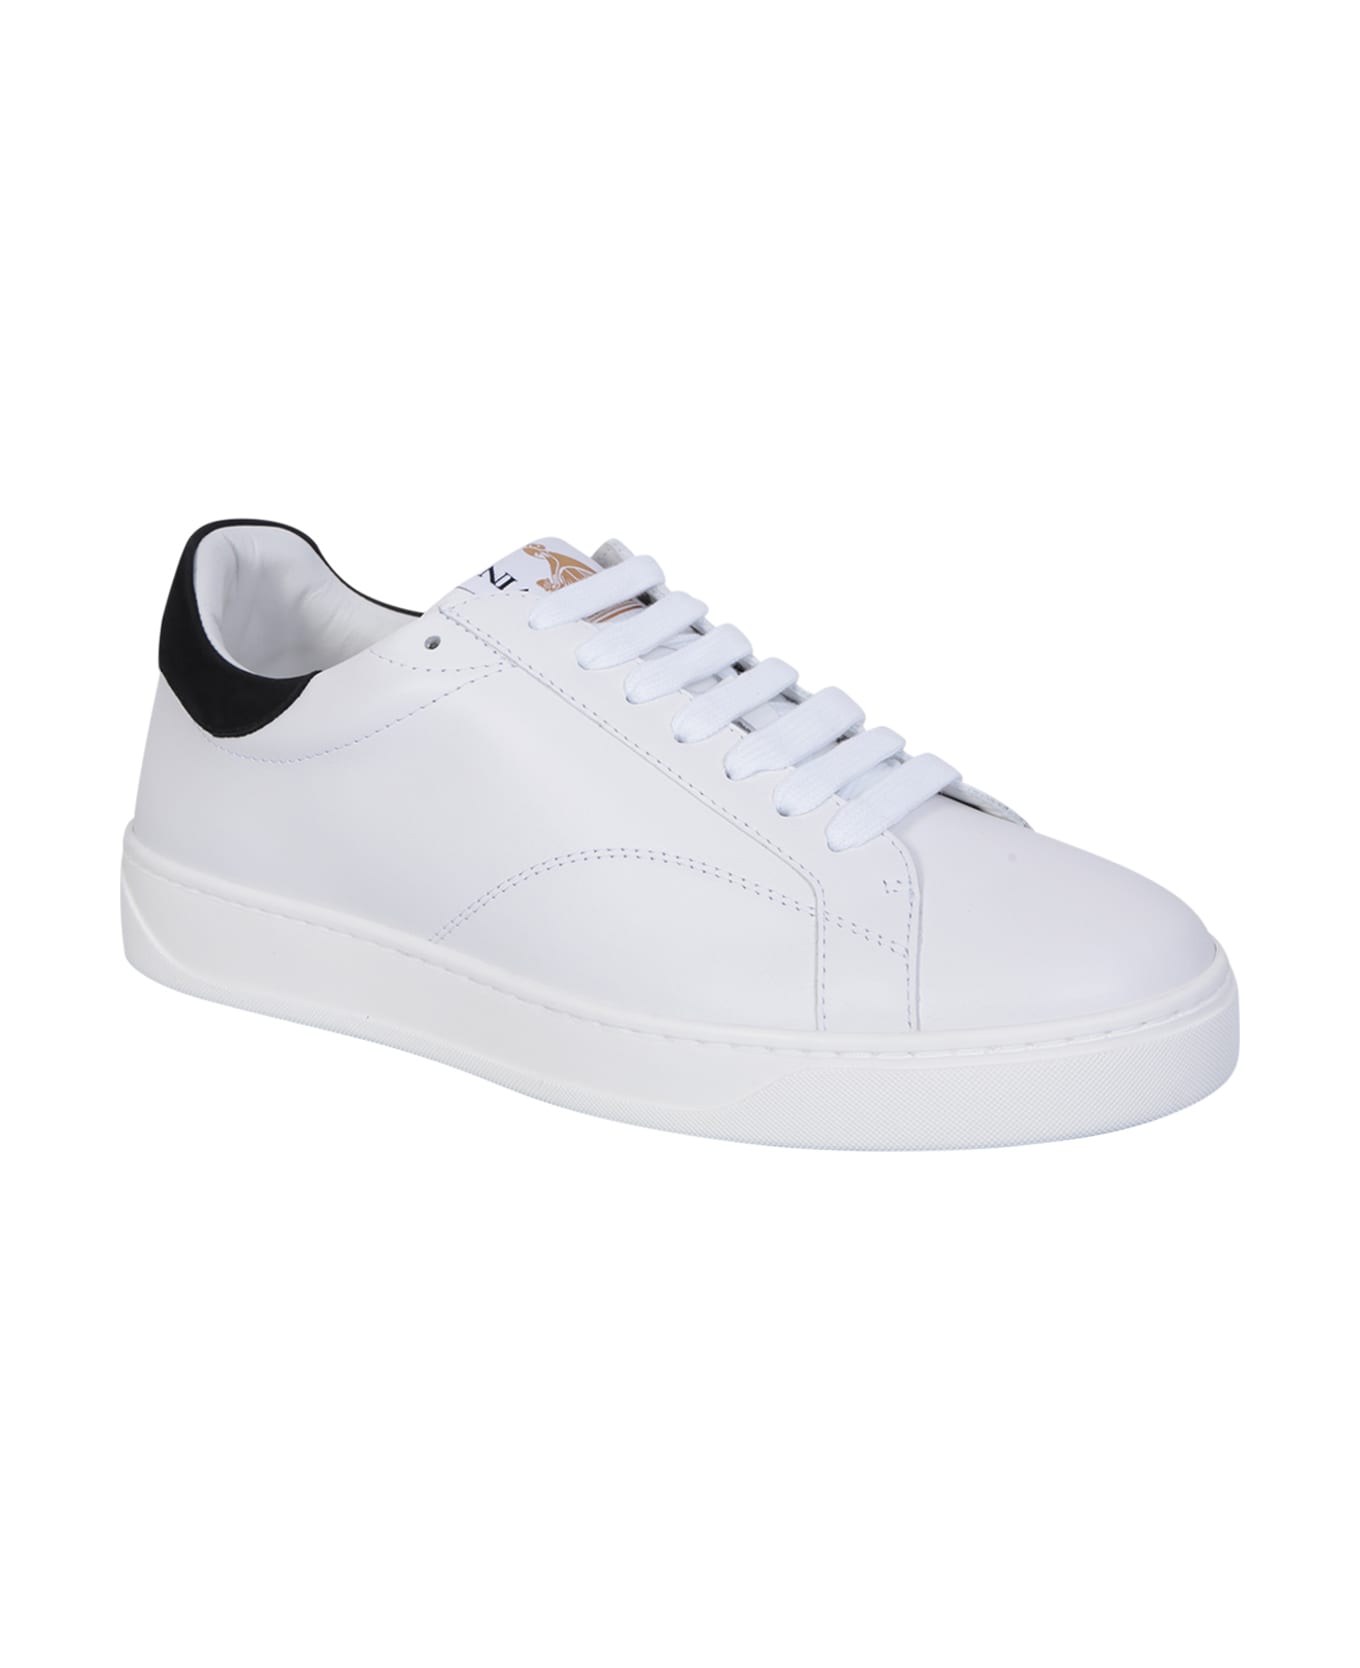 Lanvin White And Black Ddb0 Sneakers - Bianco